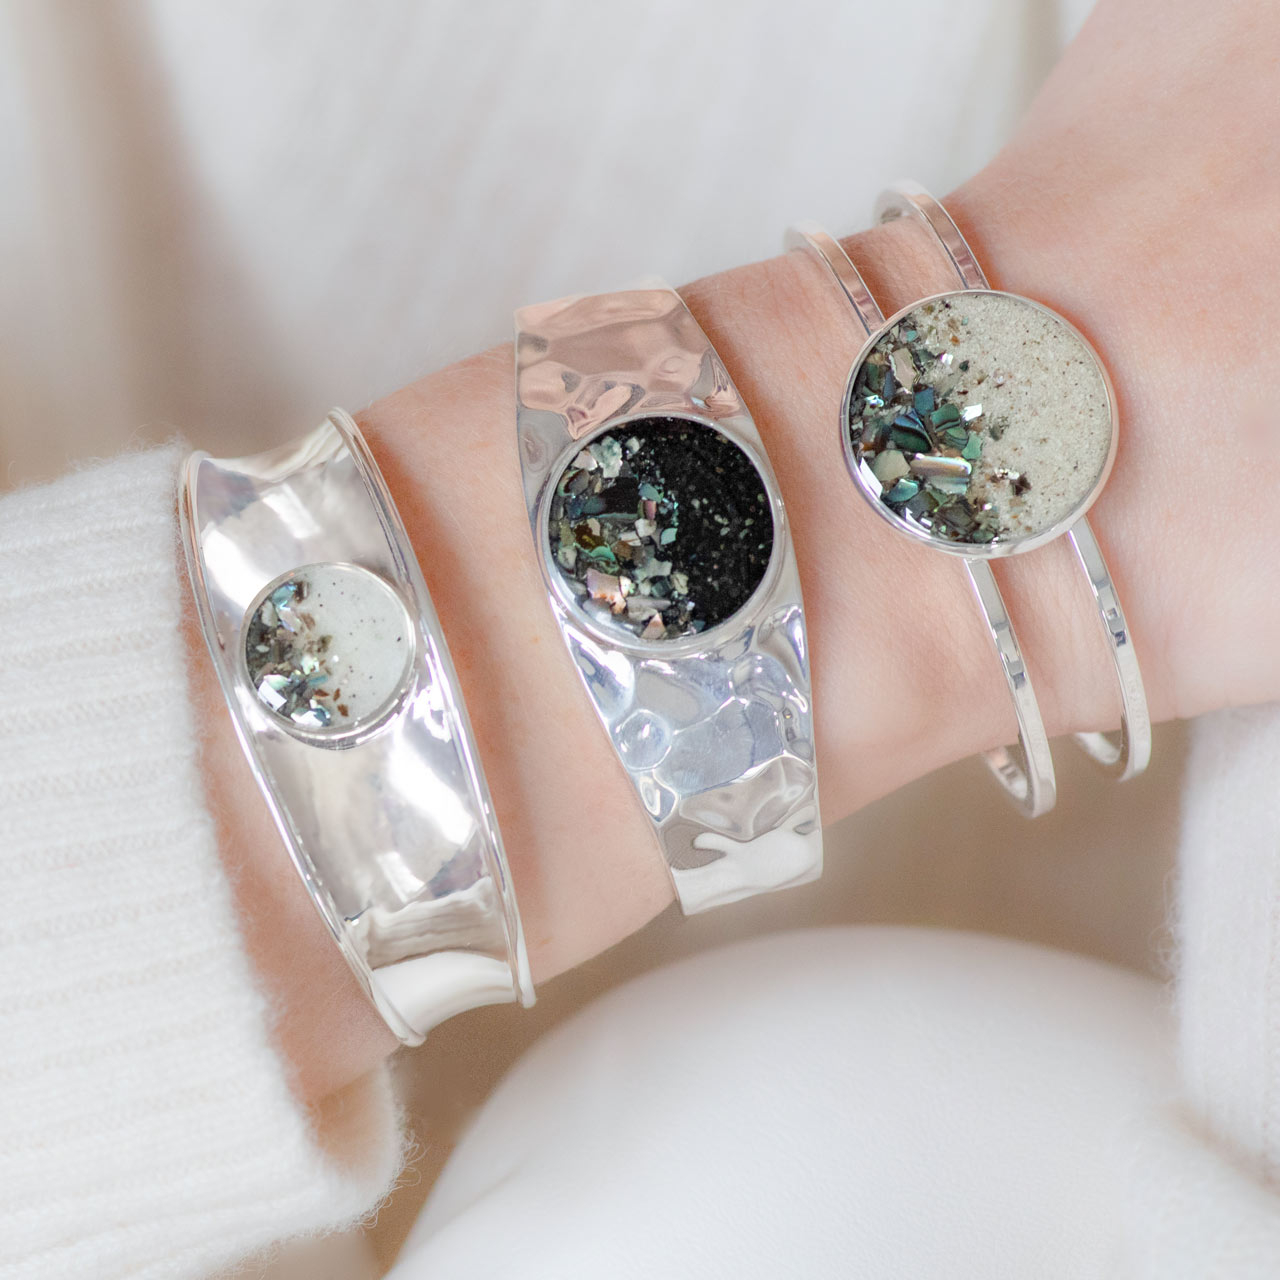 Product shot of wrist wearing three of Dune Jewelry's Abalone Gradient designs, including the Bayview Cuff Bracelet.